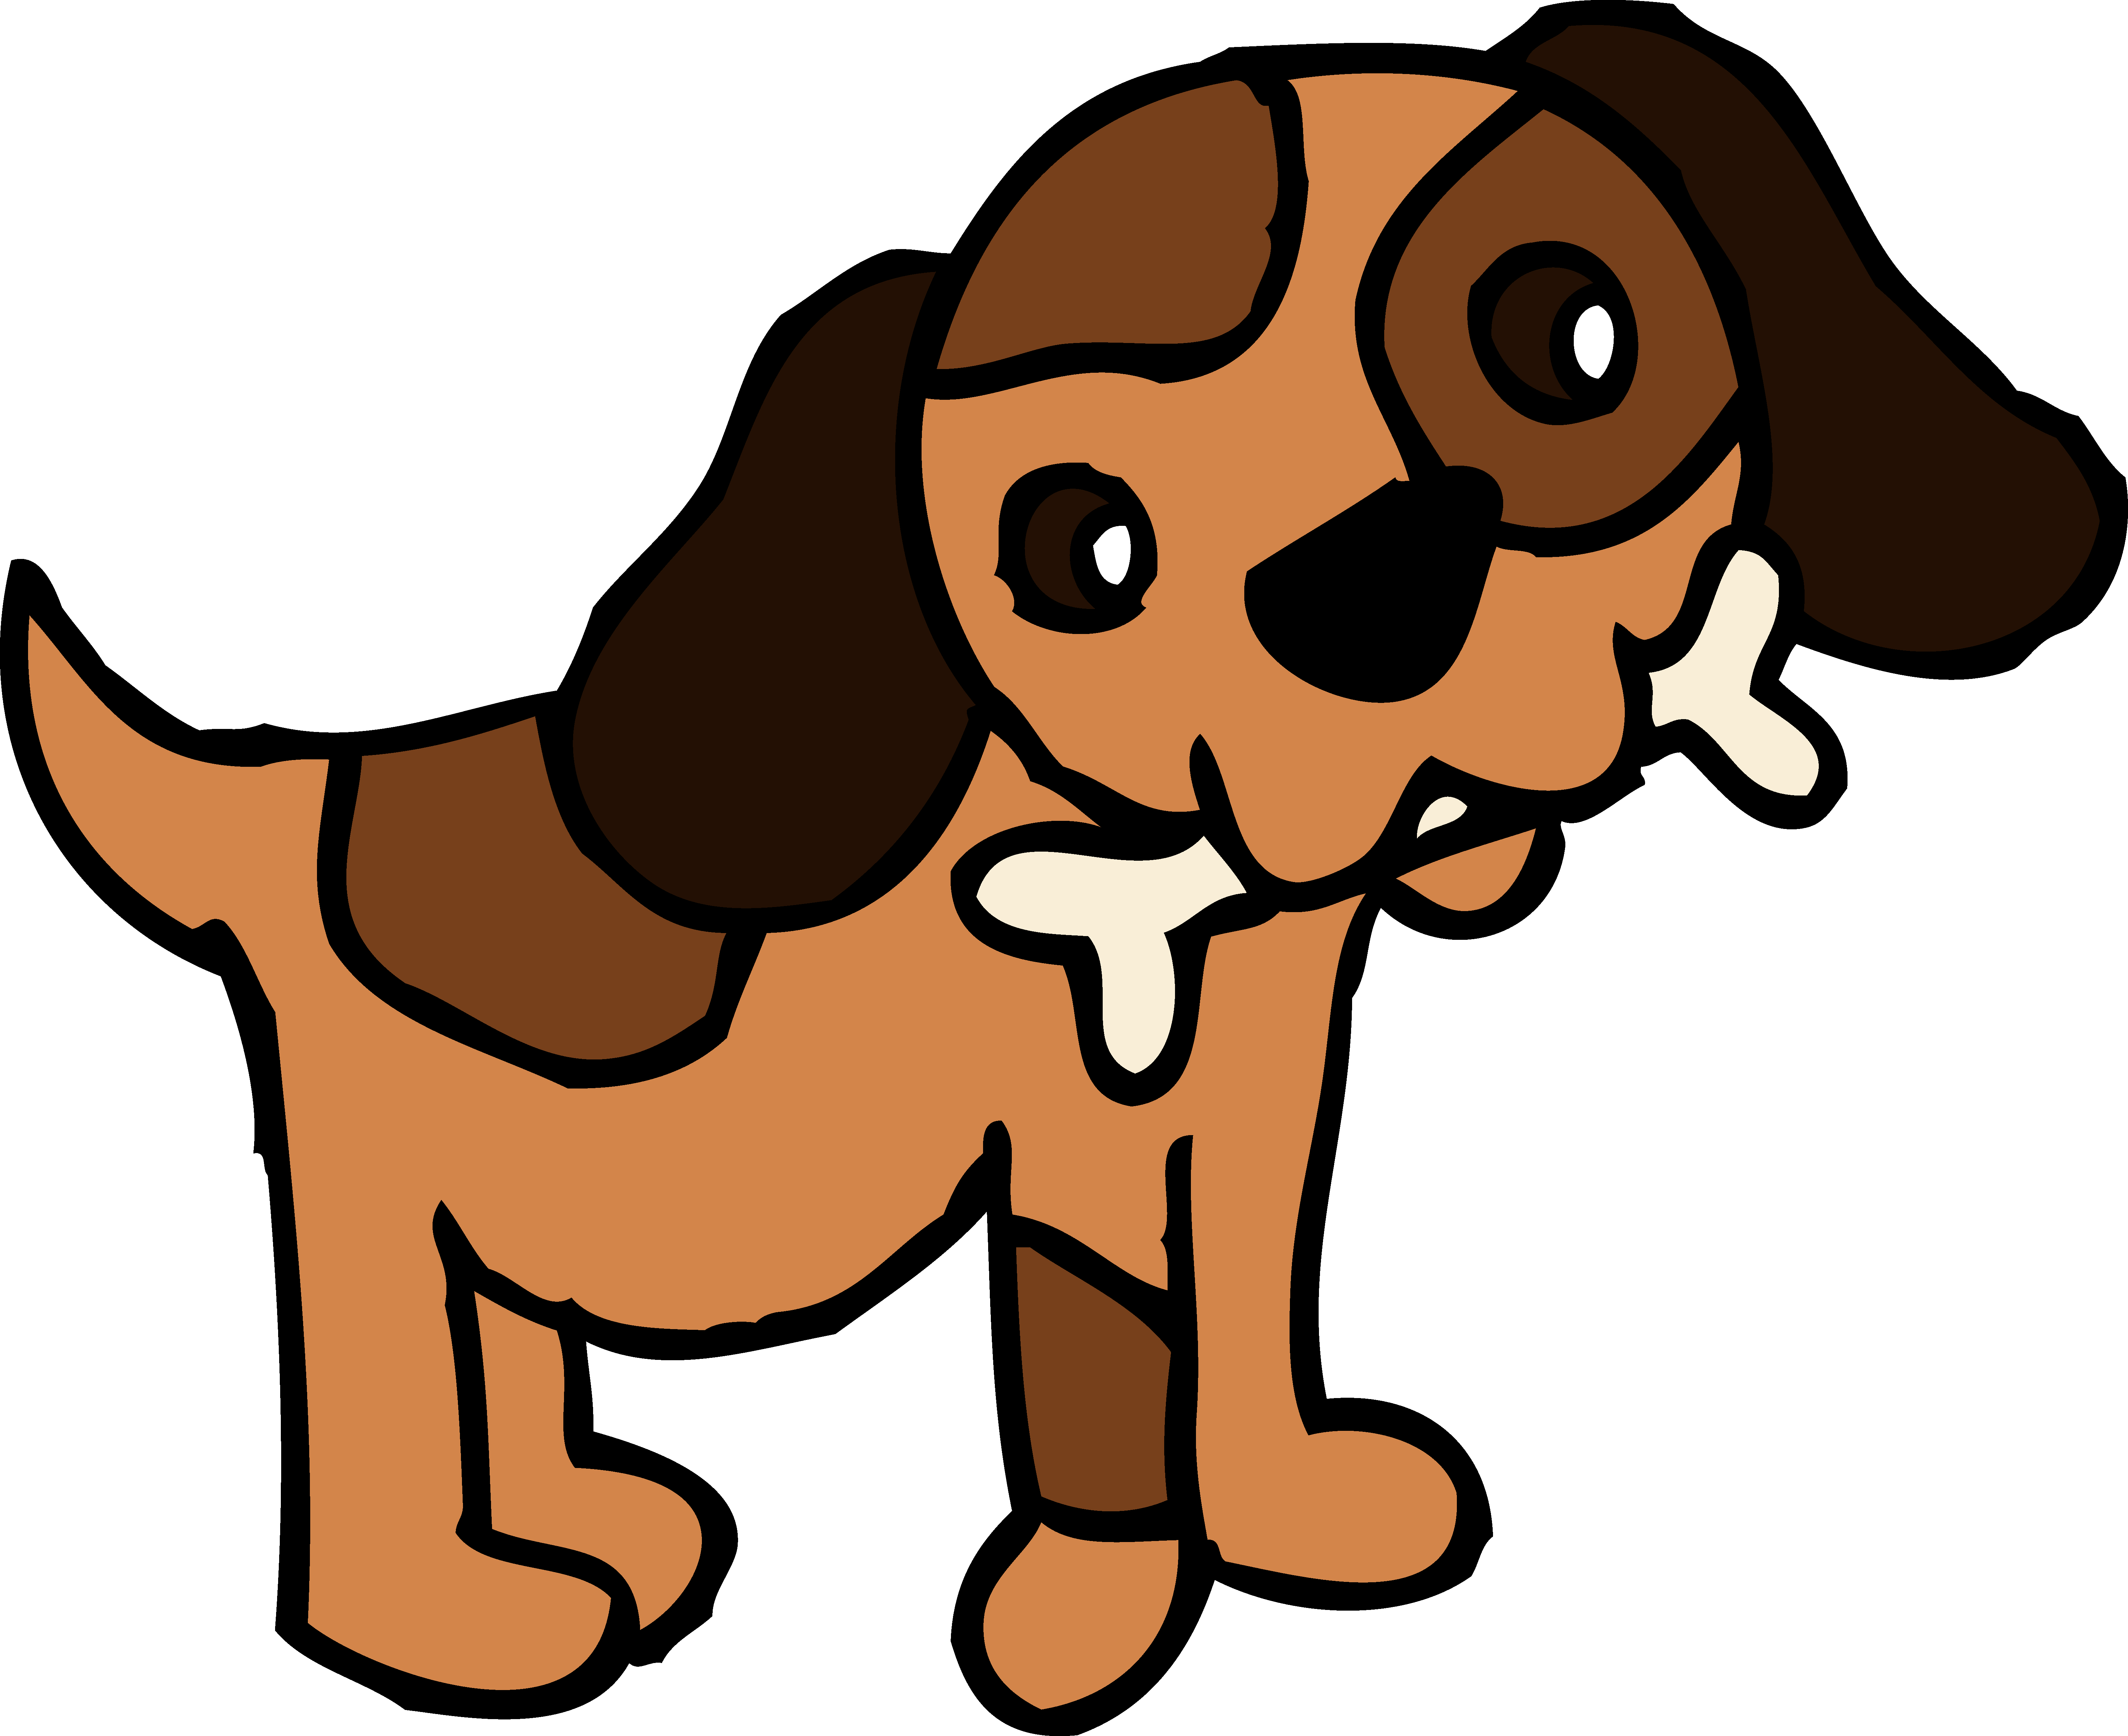 Cute Dogs Clip Art Images  Pictures - Becuo